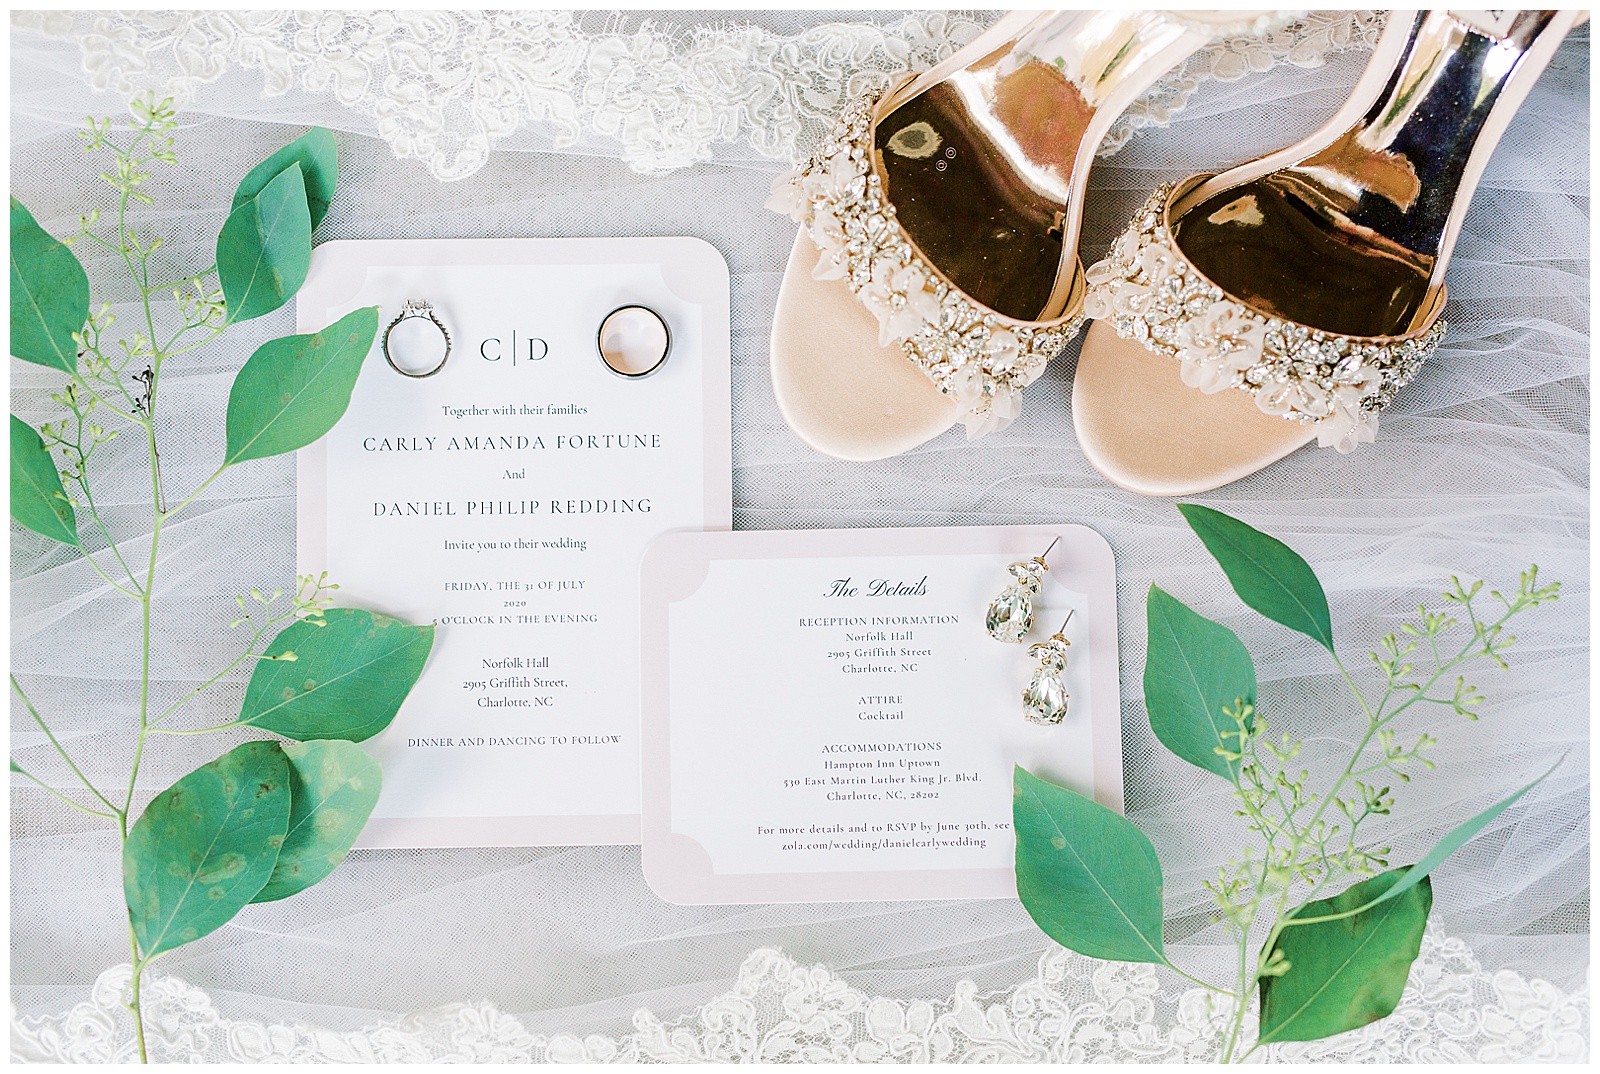 Invitation Suite framed by bright green leaves and gold heels